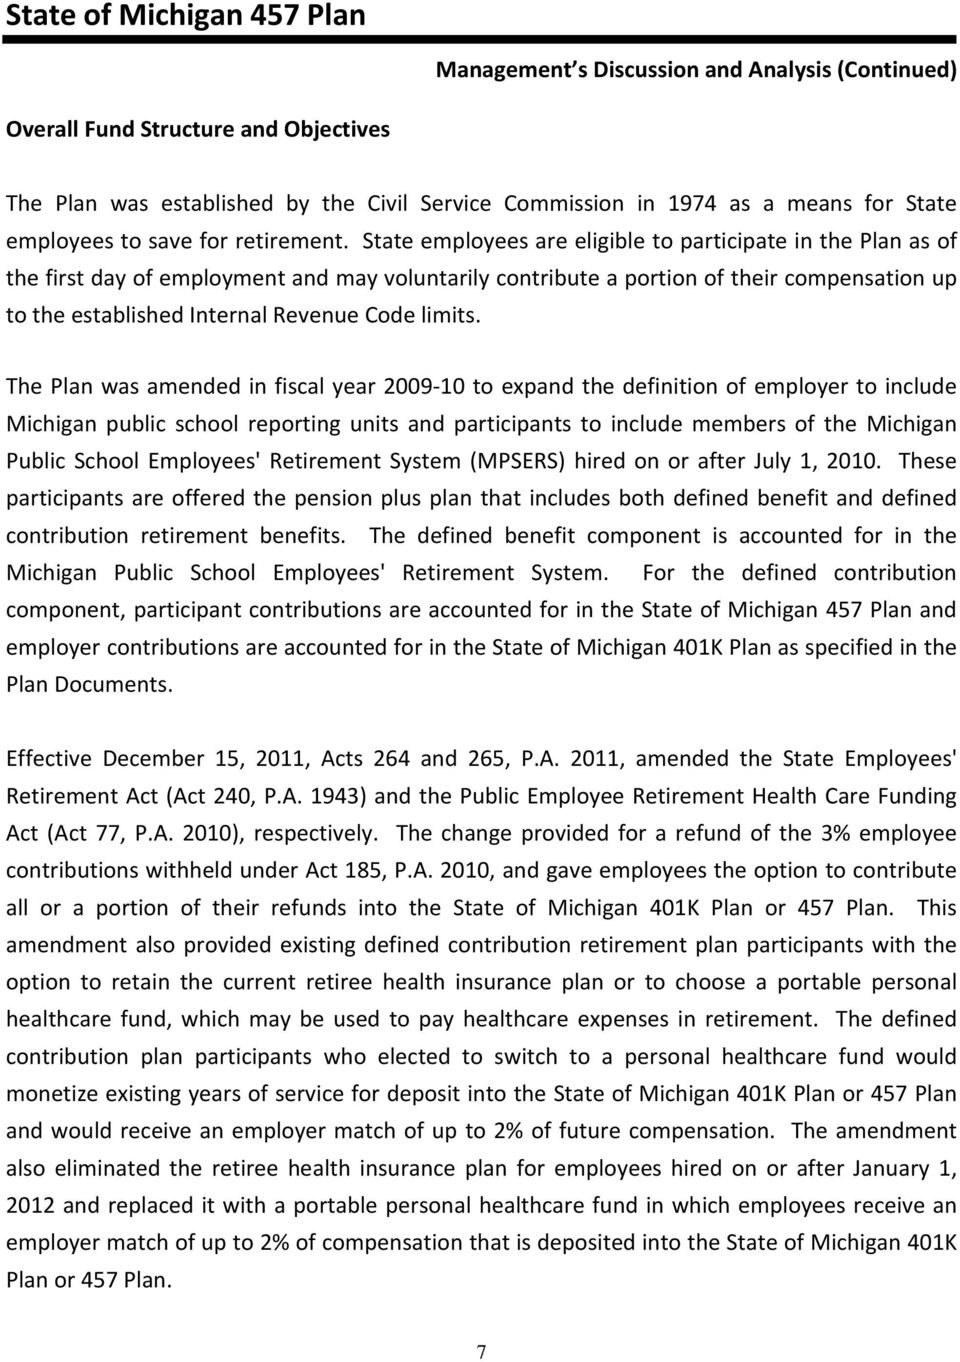 State employees are eligible to participate in the Plan as of the first day of employment and may voluntarily contribute a portion of their compensation up to the established Internal Revenue Code